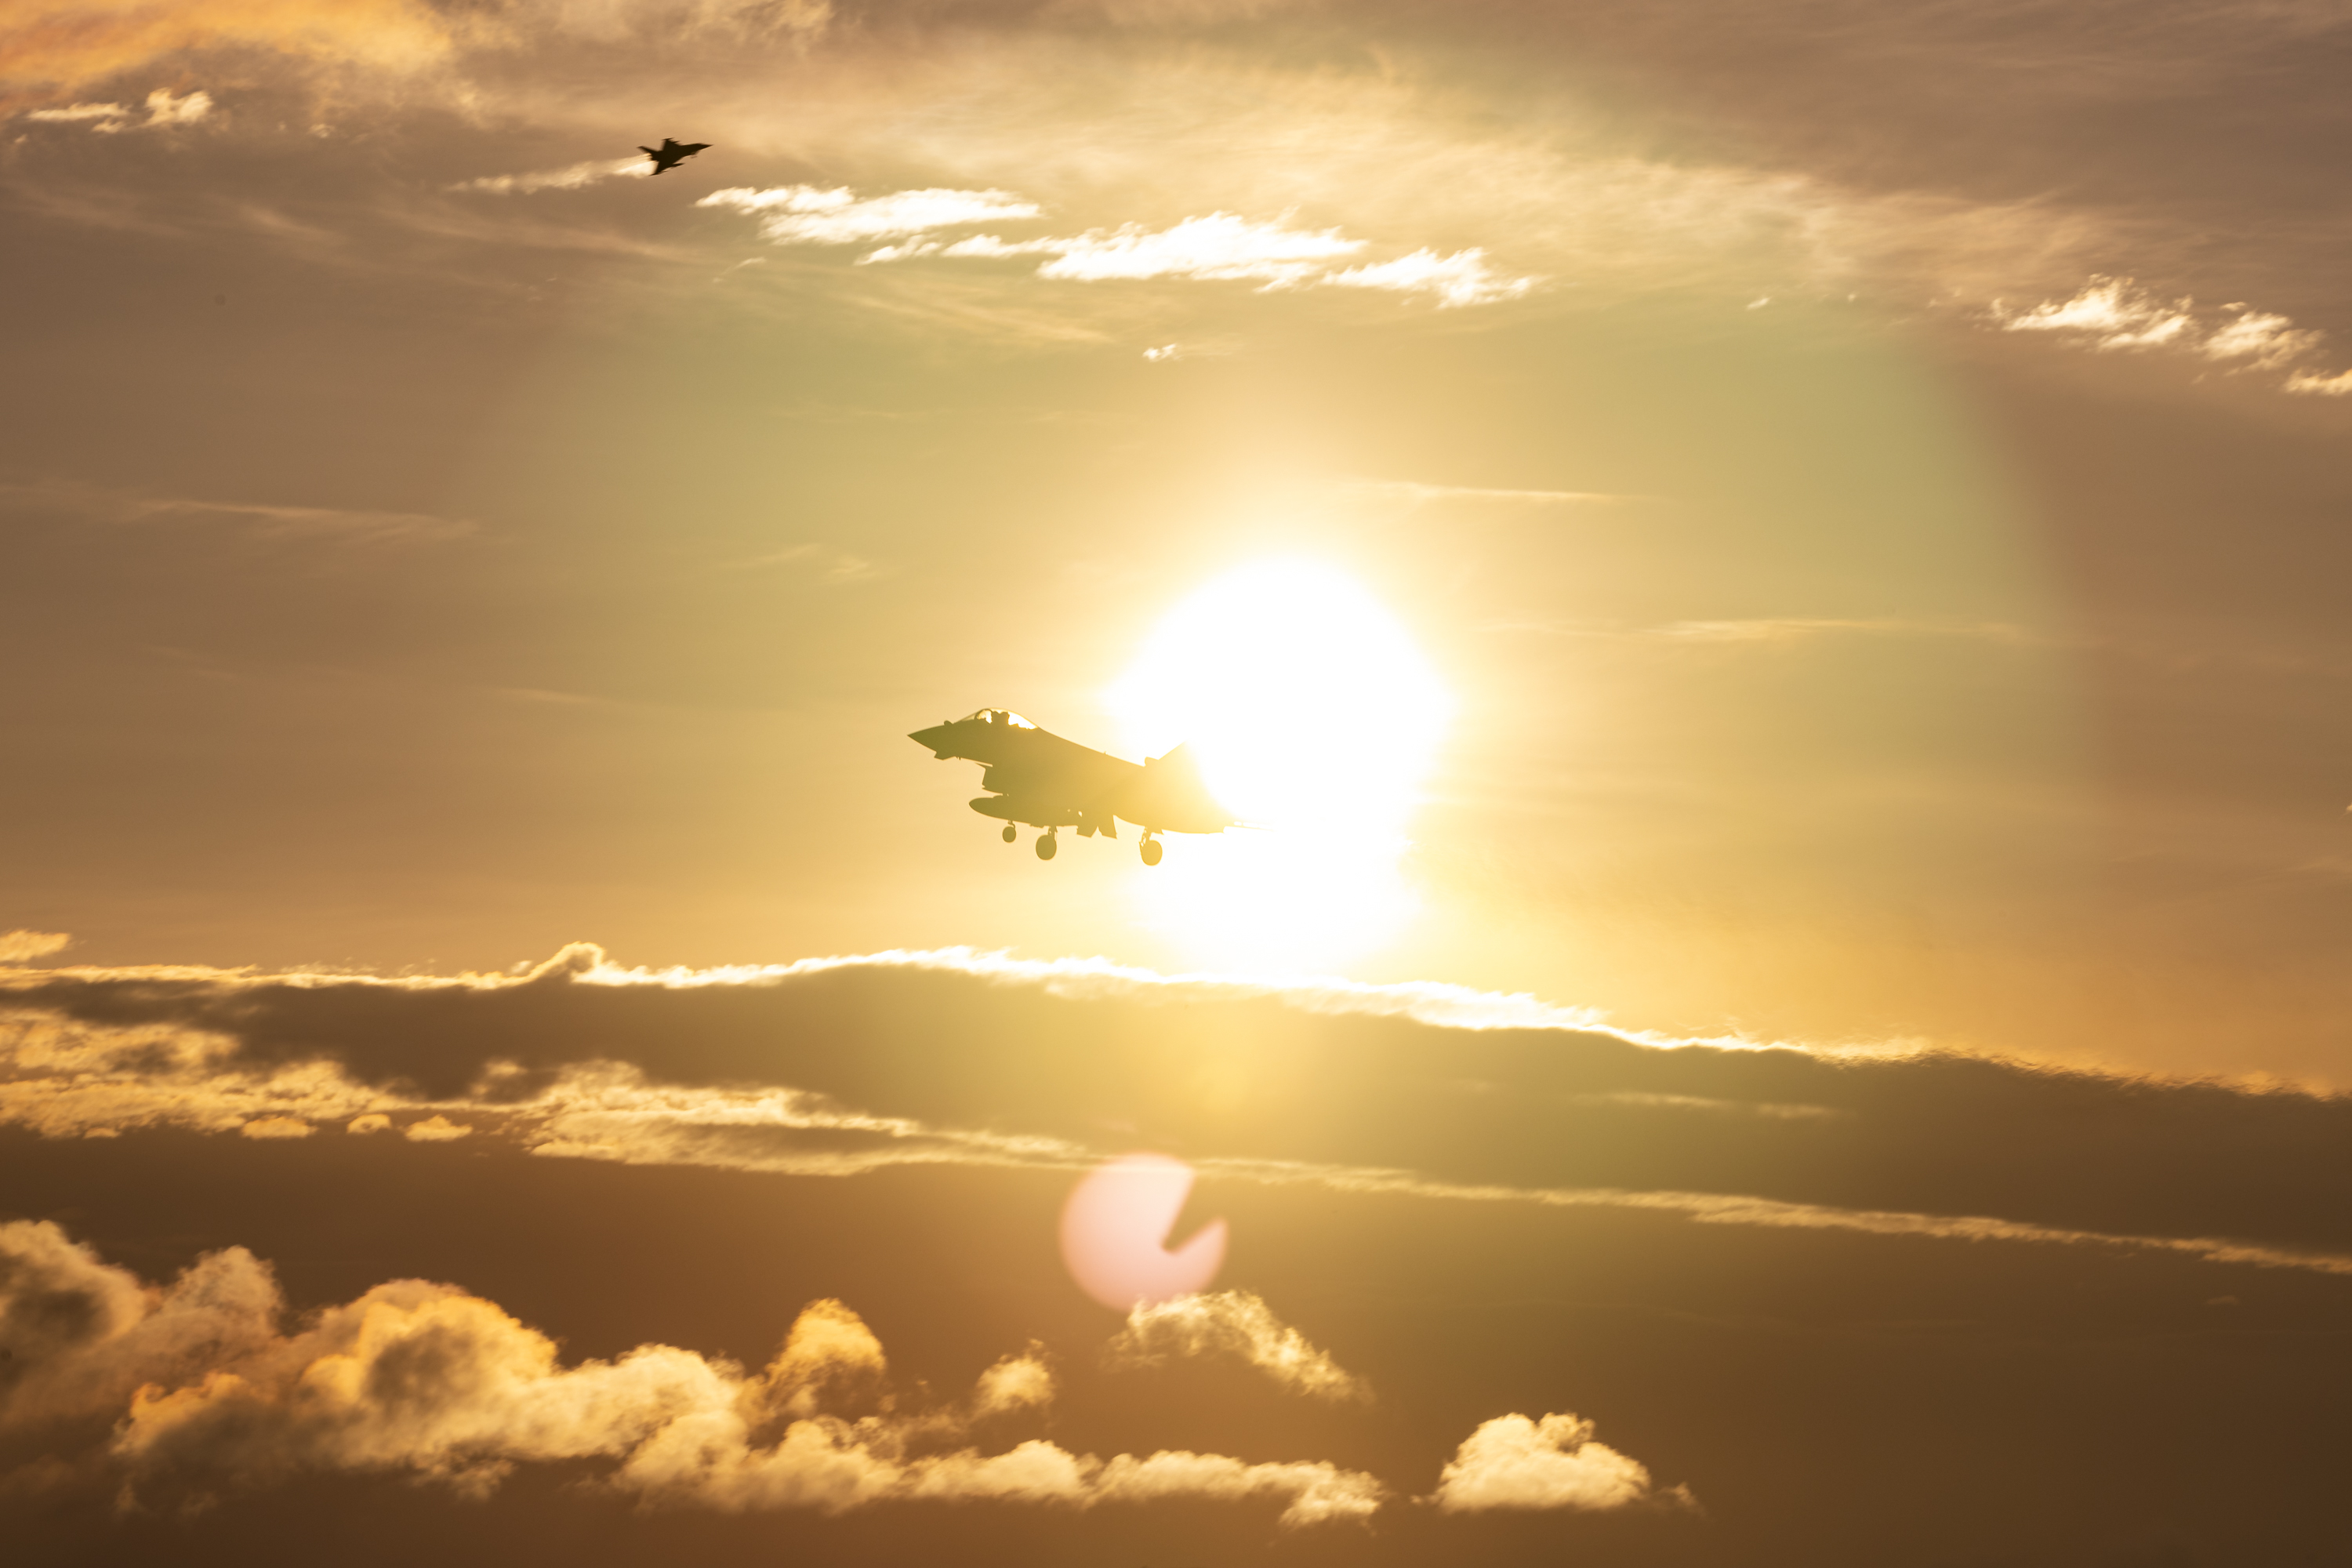 RAF Typhoon aircraft flying against a sunset sky, with a distant Typhoon in the background